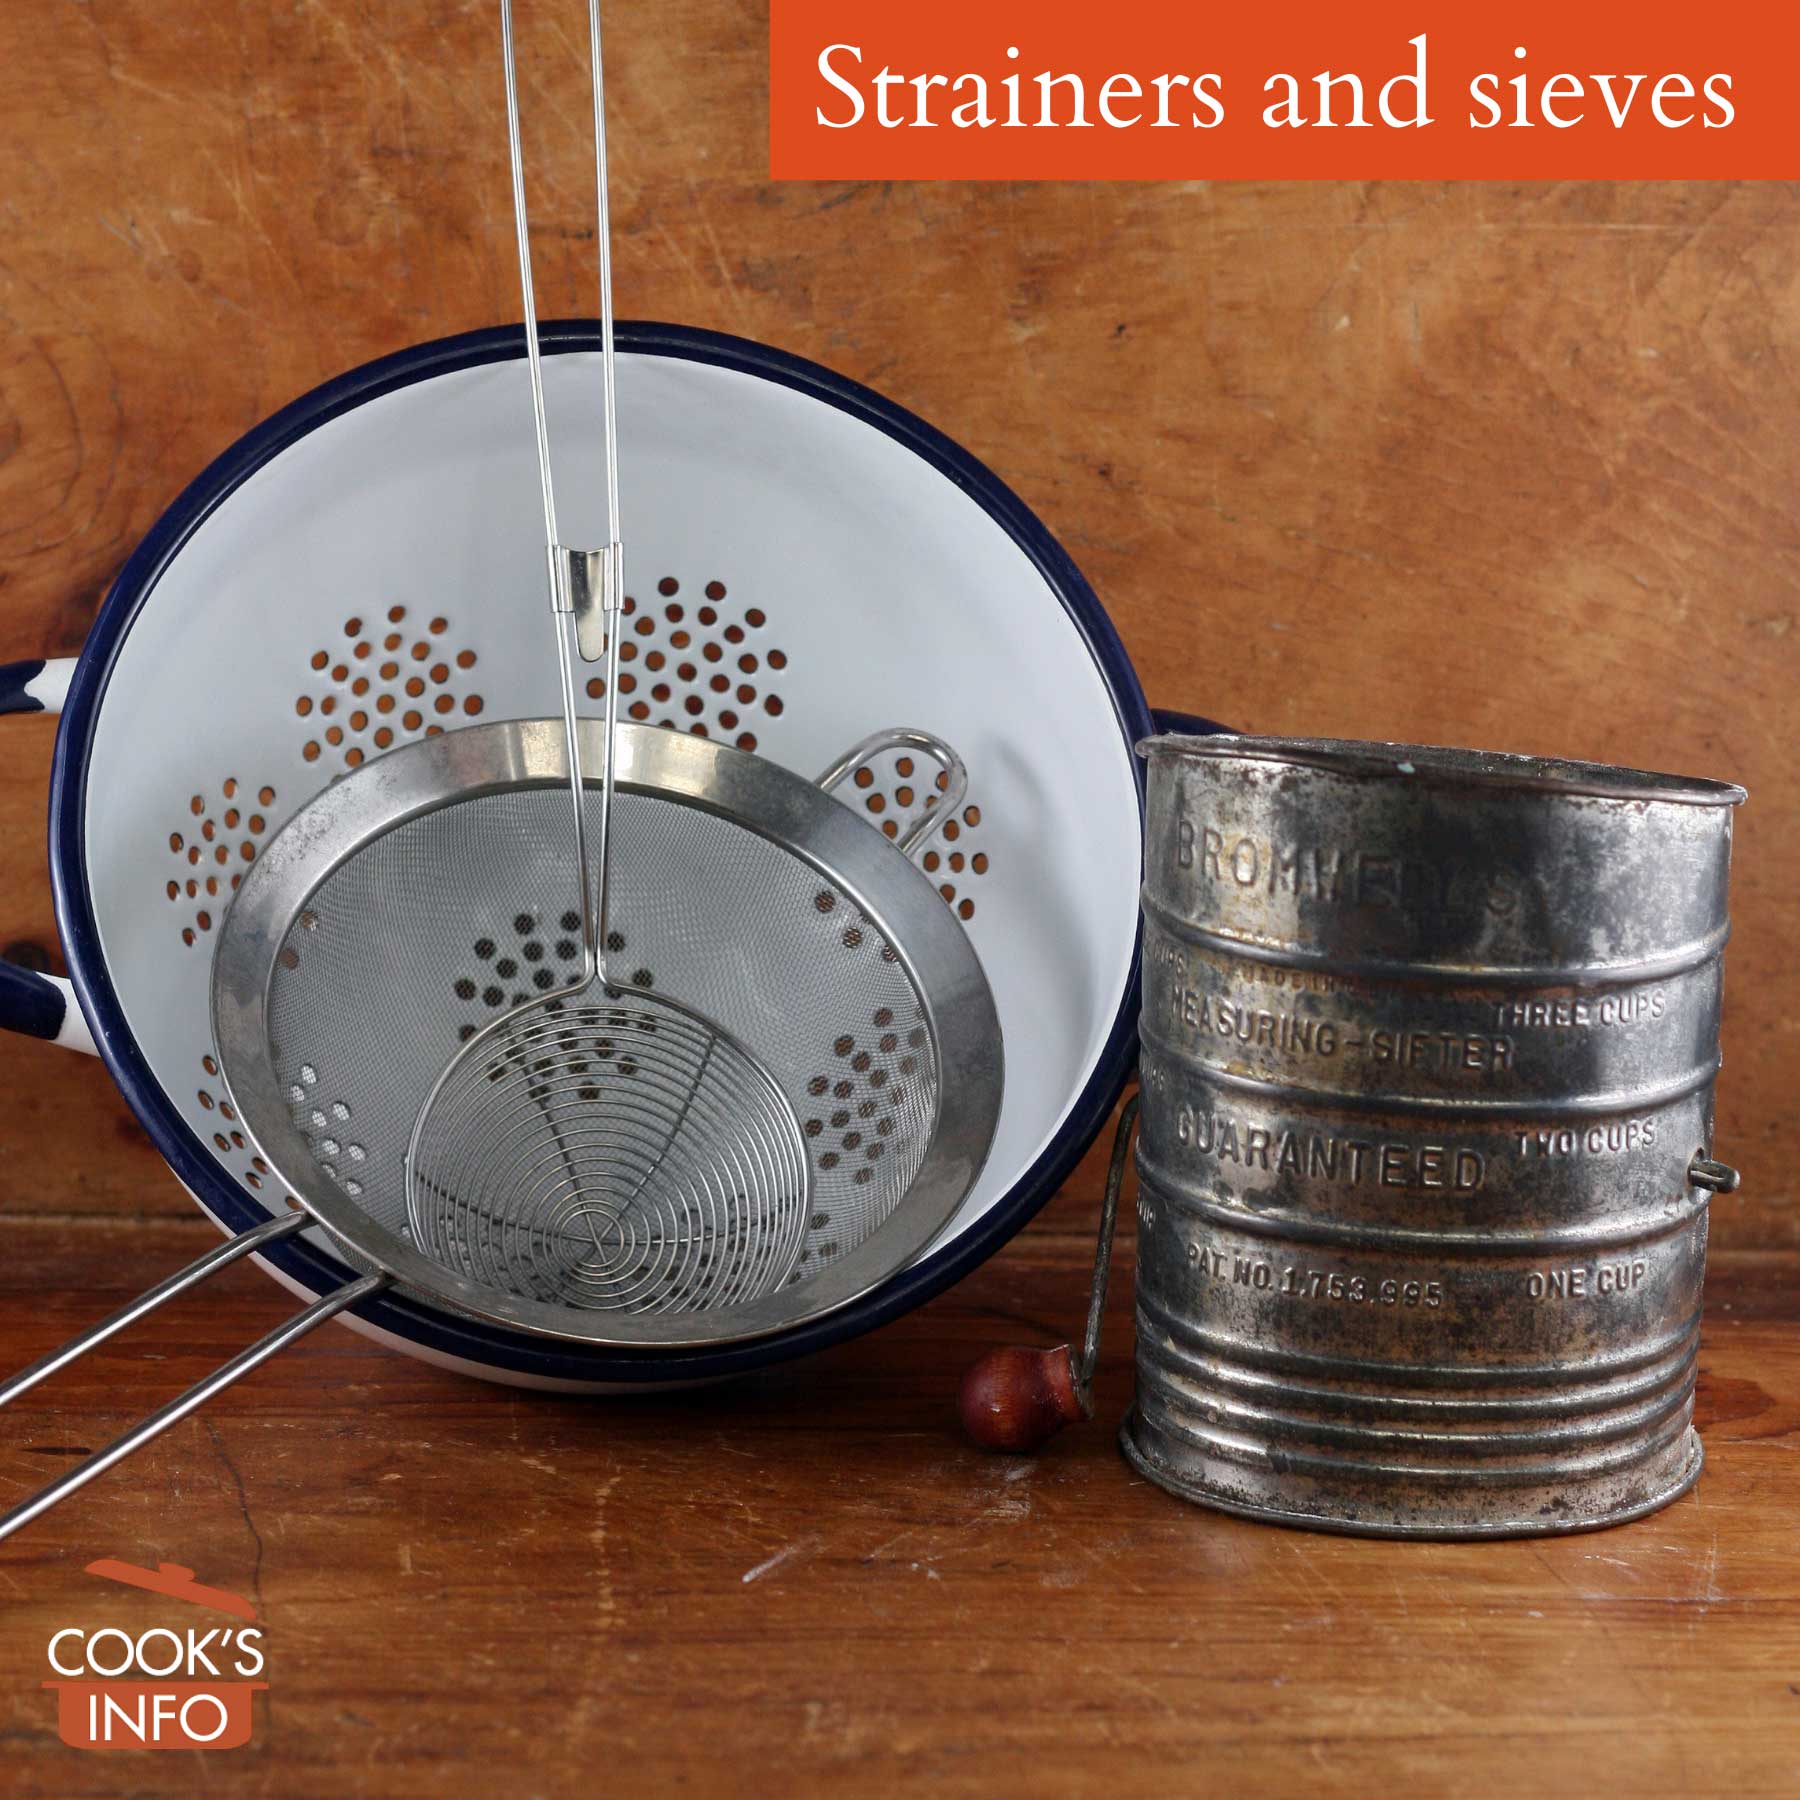 Strainers and sieves